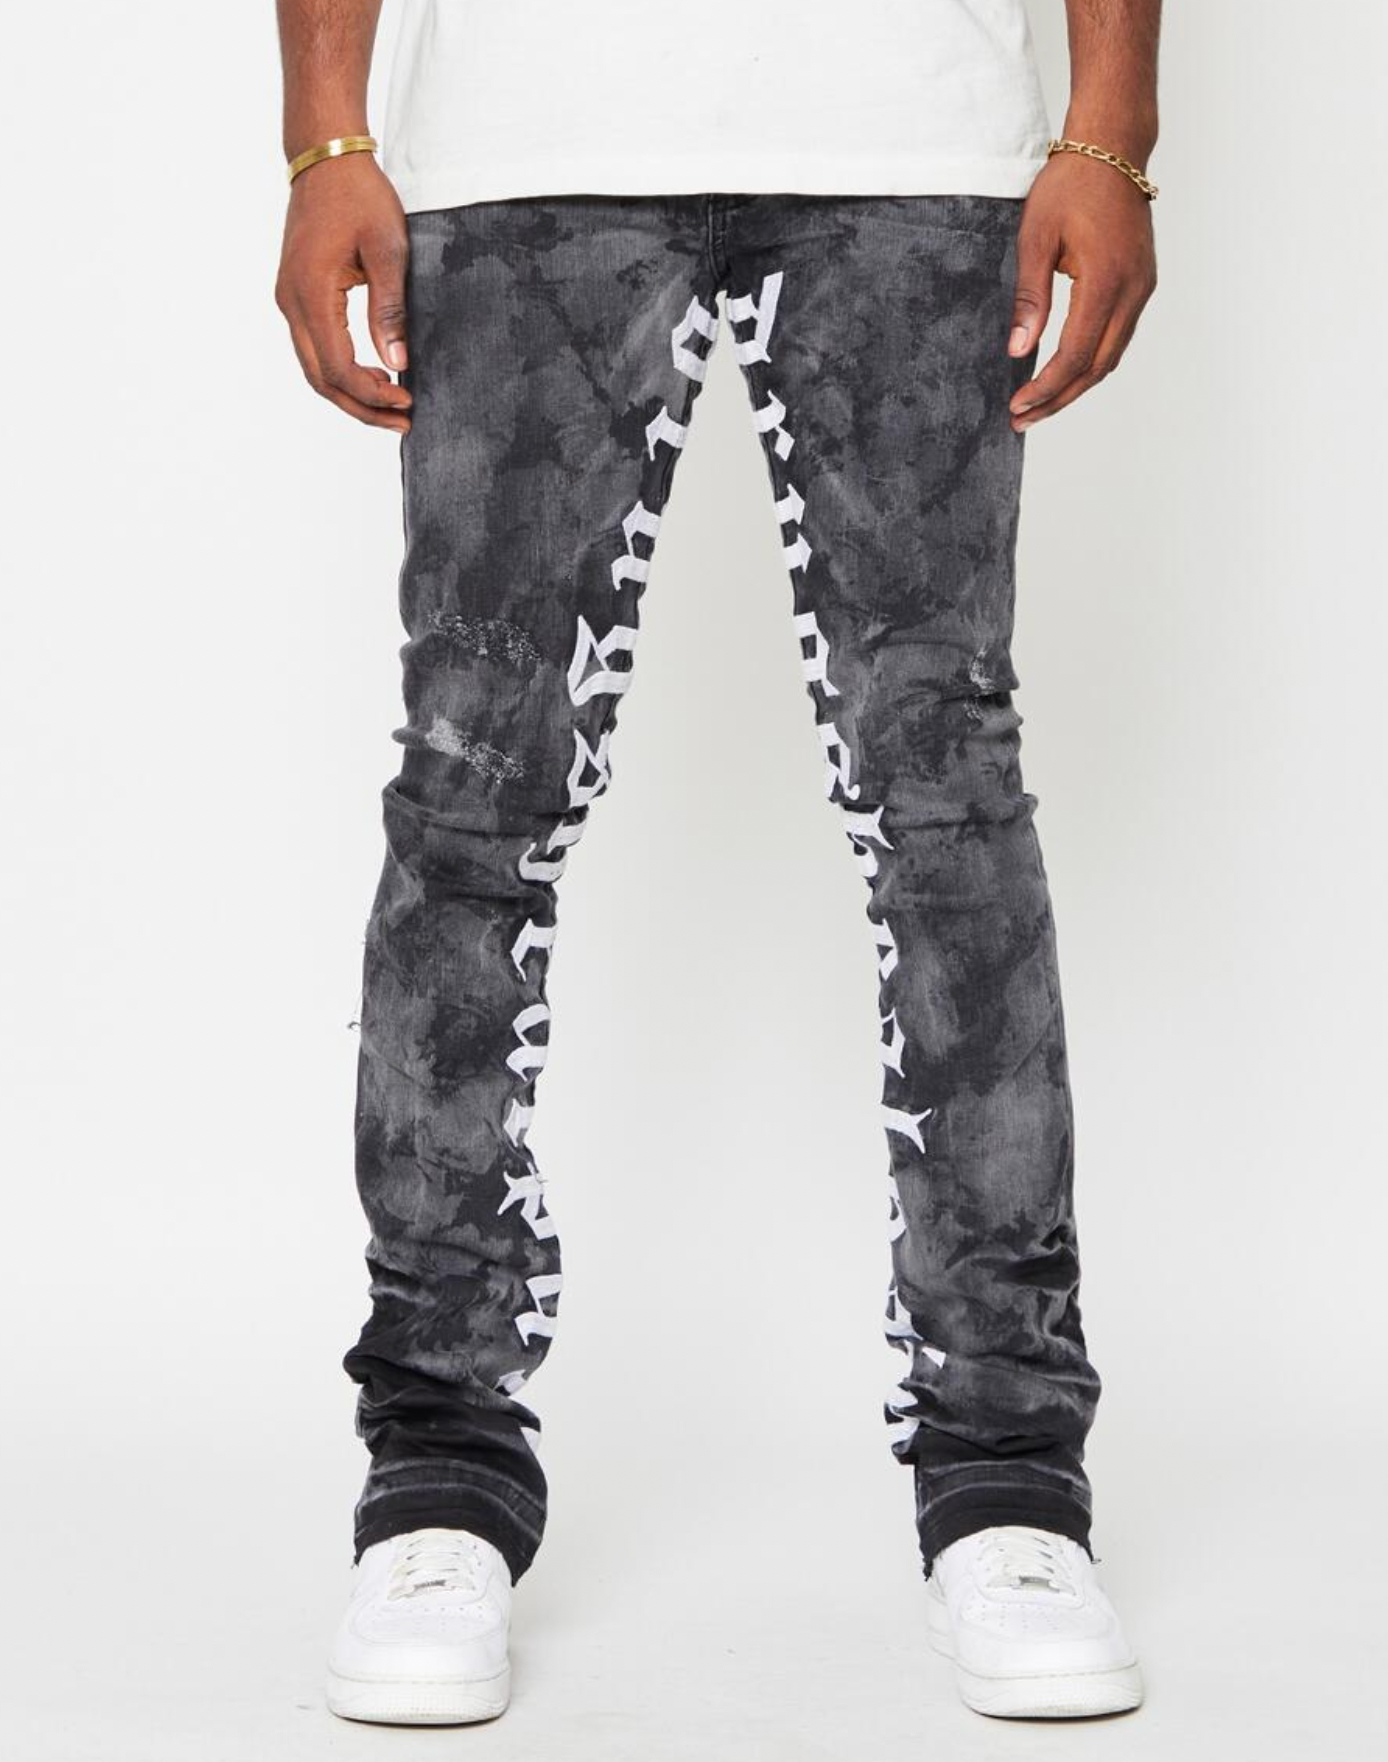 Golden Denim The Stacked - Leon ( Embroidered White Letters )